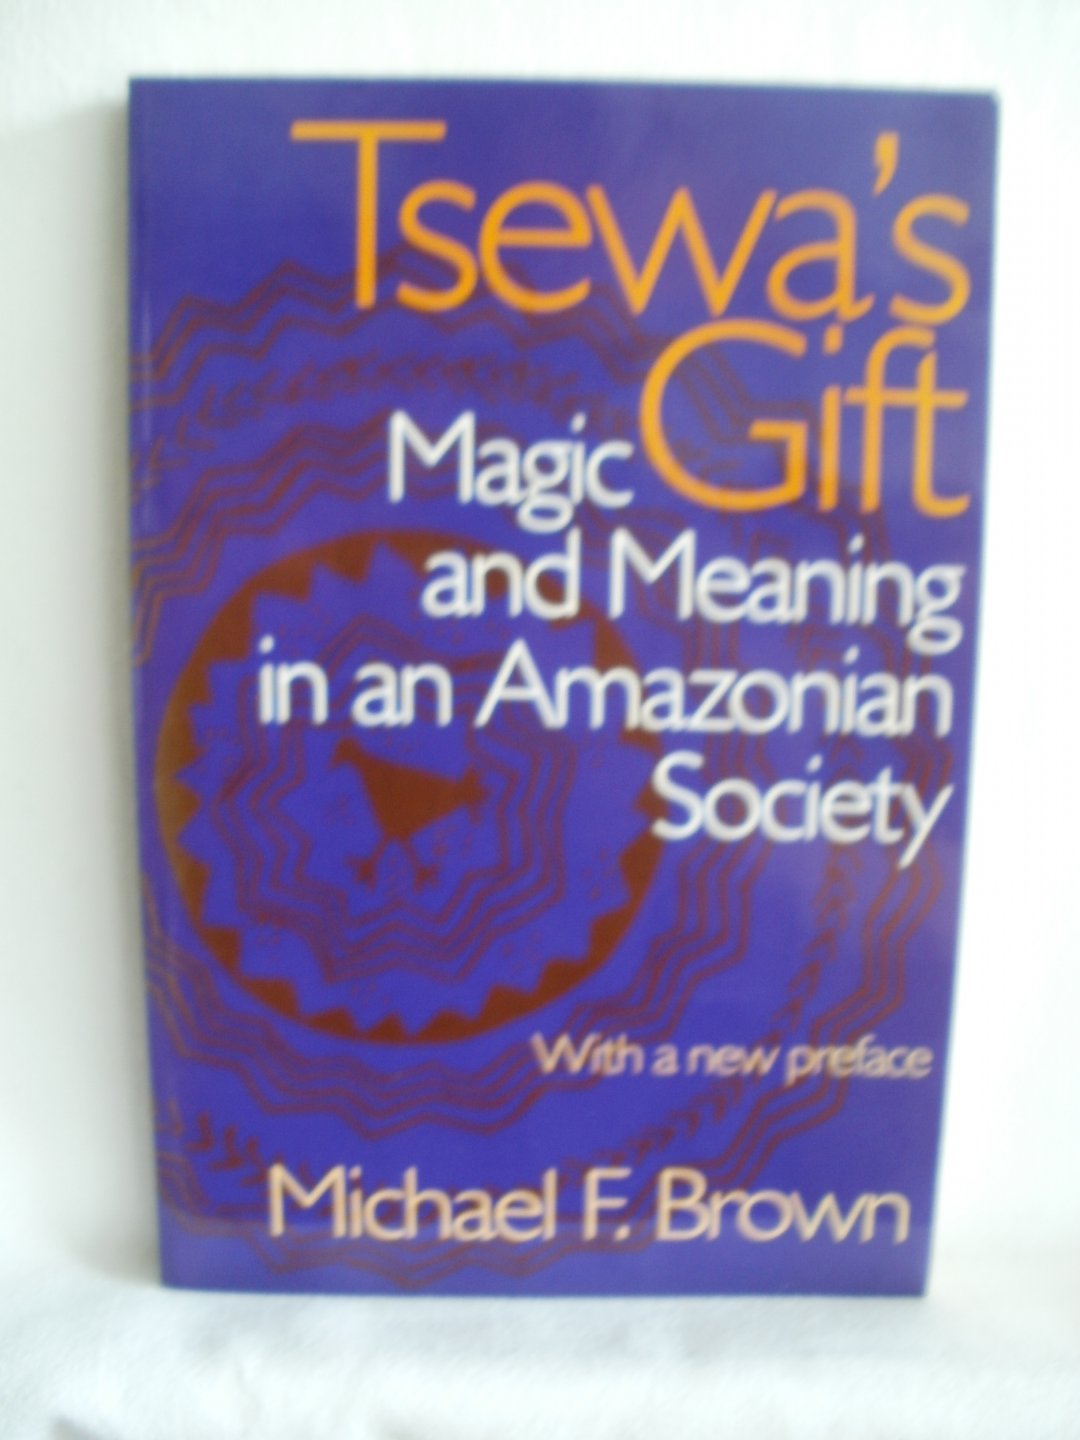 Brown, Michael F. - Tsewa's Gift. Magic and Meaning in an Amazonian Society. Smithsonian Series in Ethnographic Inquiry.